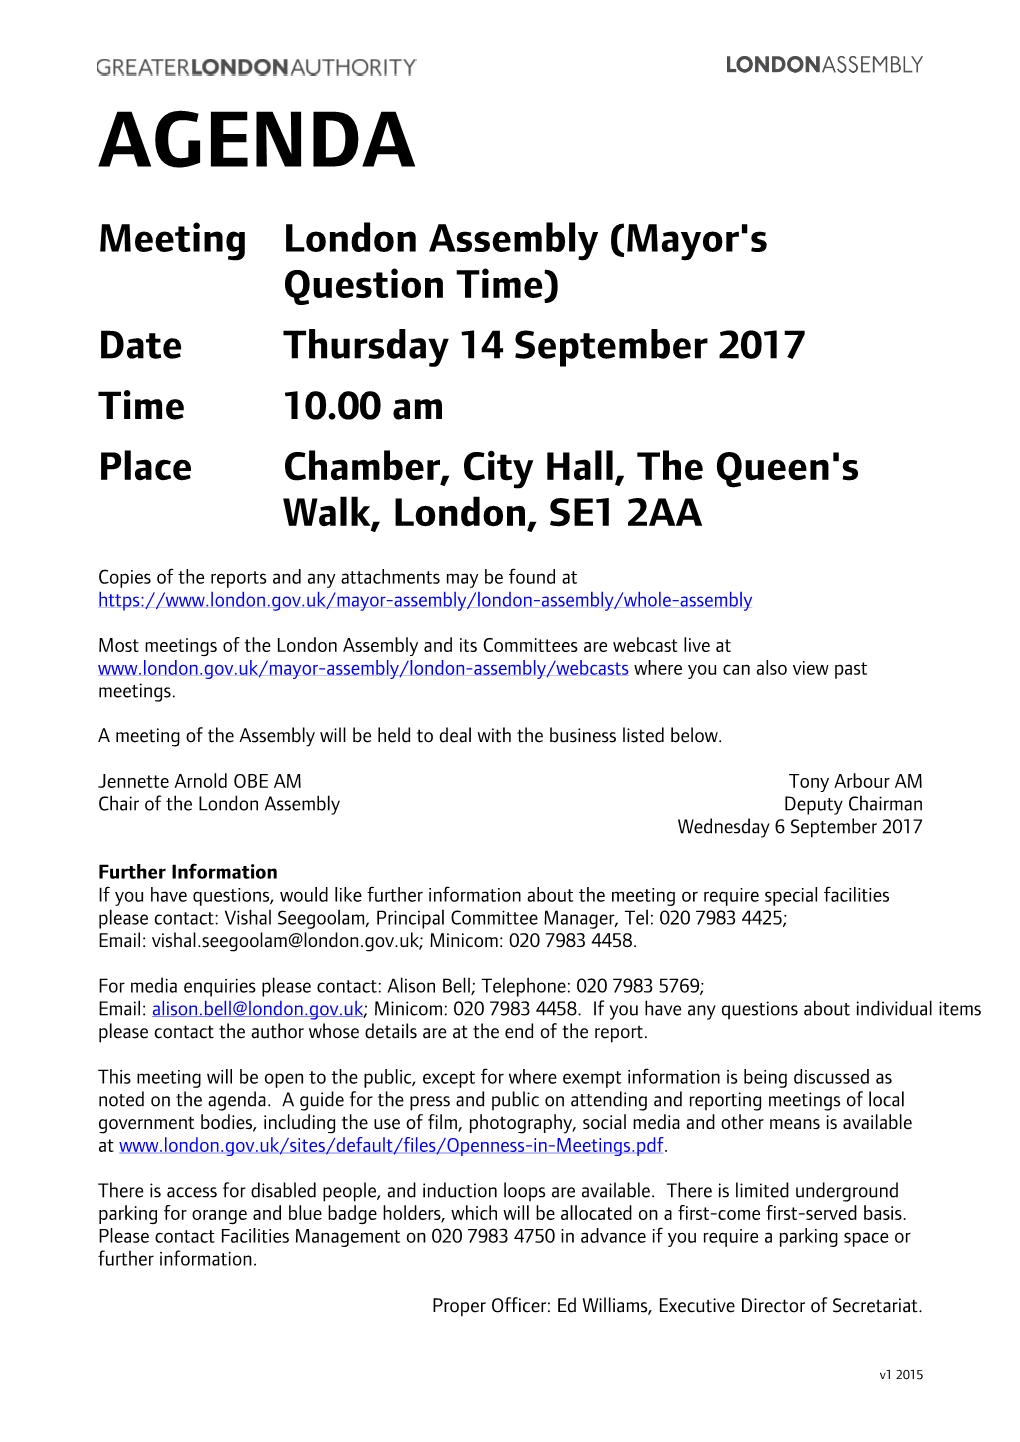 Agenda Document for London Assembly (Mayor's Question Time)